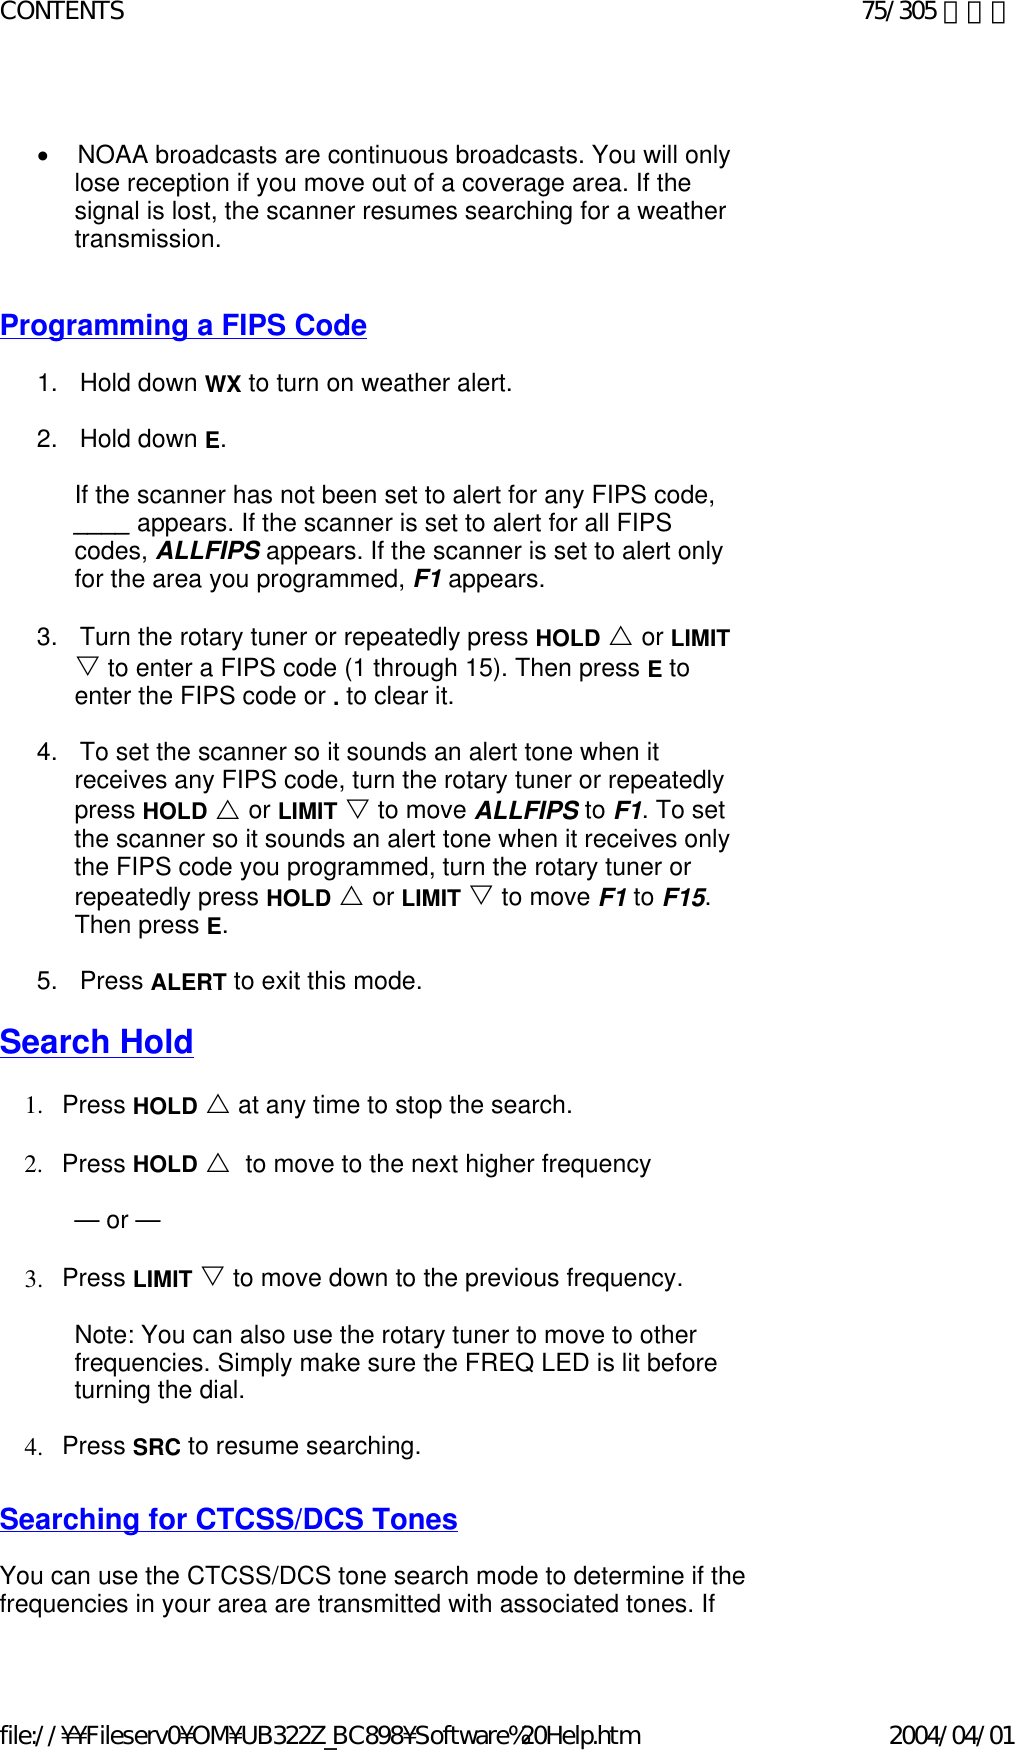   •        NOAA broadcasts are continuous broadcasts. You will only lose reception if you move out of a coverage area. If the signal is lost, the scanner resumes searching for a weather transmission.      Programming a FIPS Code   1.      Hold down WX to turn on weather alert.    2.      Hold down E.   If the scanner has not been set to alert for any FIPS code, ____ appears. If the scanner is set to alert for all FIPS codes, ALLFIPS appears. If the scanner is set to alert only for the area you programmed, F1 appears.   3.      Turn the rotary tuner or repeatedly press HOLD U or LIMIT V to enter a FIPS code (1 through 15). Then press E to enter the FIPS code or . to clear it.   4.      To set the scanner so it sounds an alert tone when it receives any FIPS code, turn the rotary tuner or repeatedly press HOLD U or LIMIT V to move ALLFIPS to F1. To set the scanner so it sounds an alert tone when it receives only the FIPS code you programmed, turn the rotary tuner or repeatedly press HOLD U or LIMIT V to move F1 to F15. Then press E.   5.      Press ALERT to exit this mode.   Search Hold   1. Press HOLD U at any time to stop the search.    2. Press HOLD U  to move to the next higher frequency    — or —   3. Press LIMIT V to move down to the previous frequency.    Note: You can also use the rotary tuner to move to other frequencies. Simply make sure the FREQ LED is lit before turning the dial.   4. Press SRC to resume searching.    Searching for CTCSS/DCS Tones   You can use the CTCSS/DCS tone search mode to determine if the frequencies in your area are transmitted with associated tones. If 75/305 ページCONTENTS2004/04/01file://¥¥Fileserv0¥OM¥UB322Z_BC898¥Software%20Help.htm